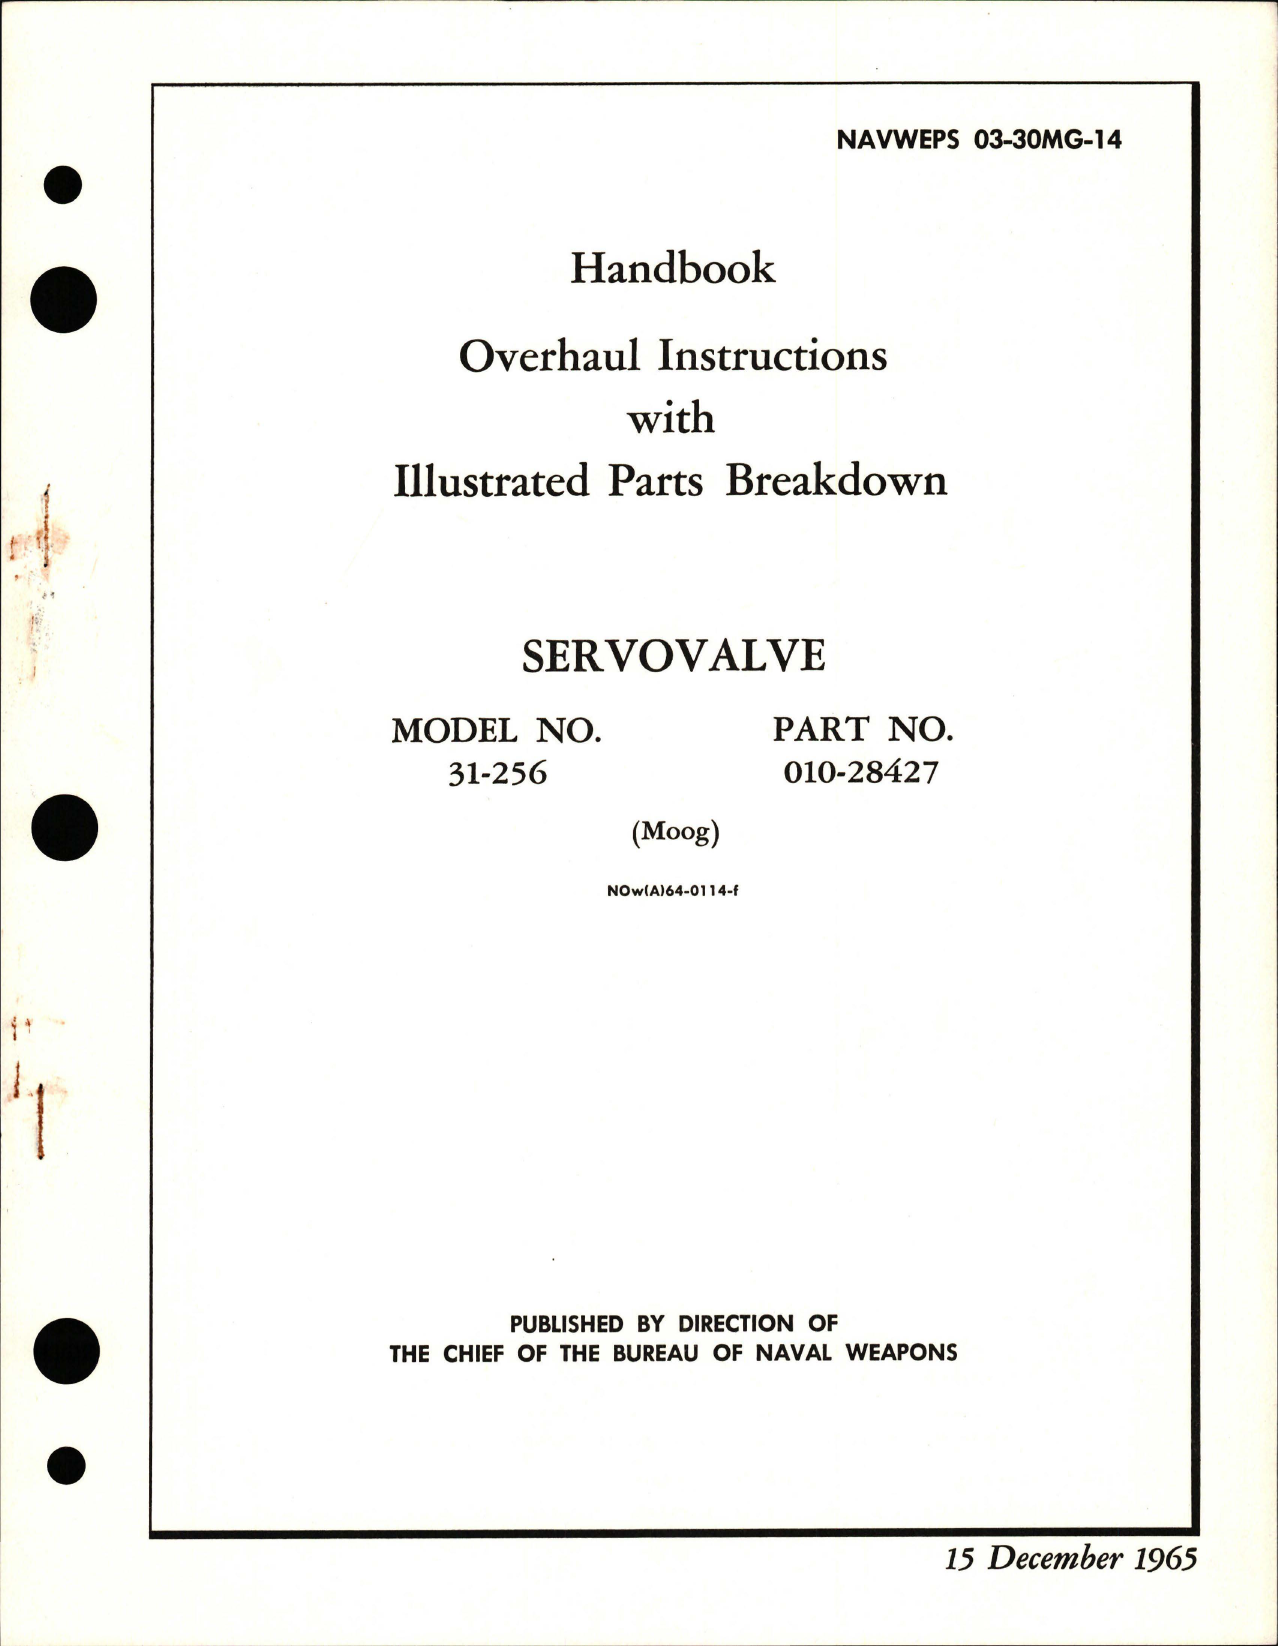 Sample page 1 from AirCorps Library document: Overhaul Instructions with Illustrated Parts Breakdown for Servovalve - Model 31-256 - Part 010-28427 